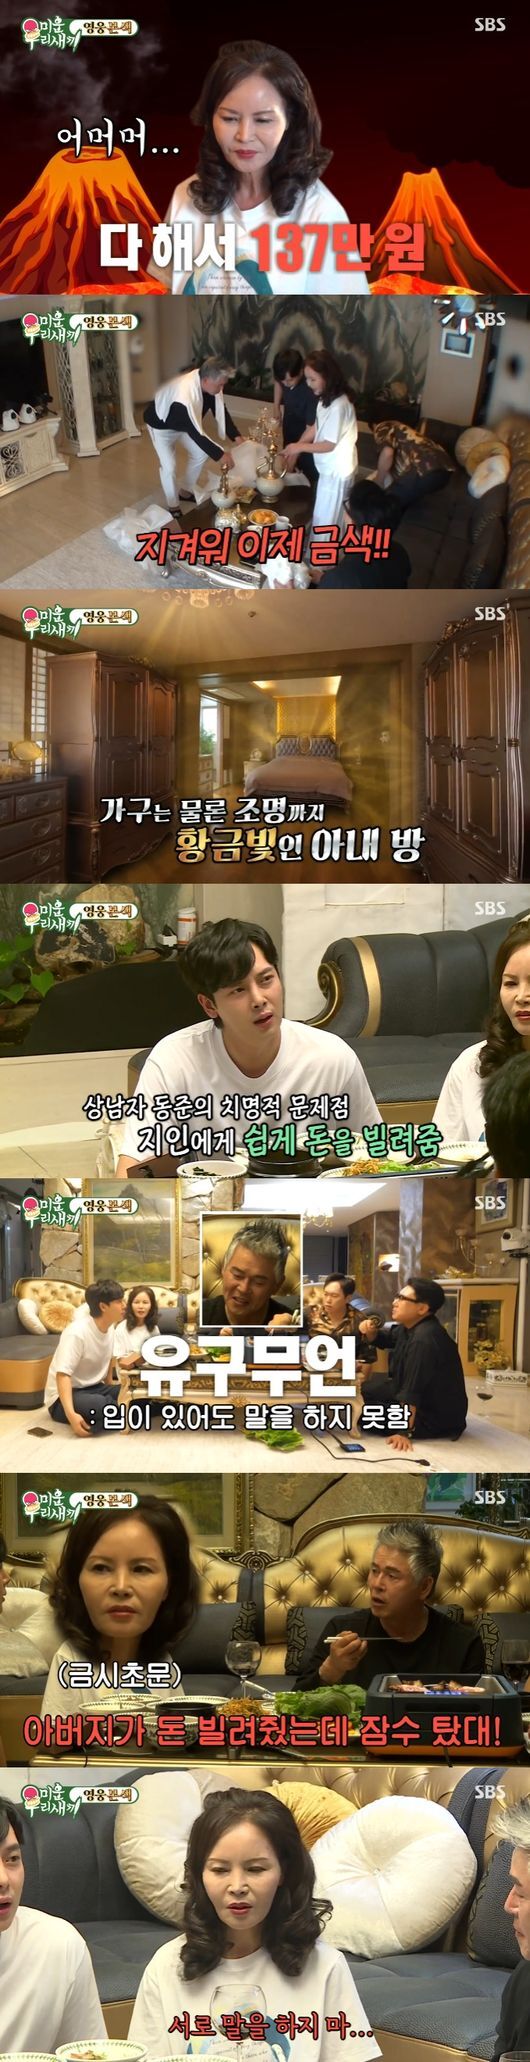 Sang Man Lee Dong-Jun shows off his unsettled golden loveOn the 3rd broadcast SBS My Little Old Boy, Lee Sang-min and Song Jin-woo, who visited the house of former Taekwondo player Actor Lee Dong-Jun, were drawn.Lee Sang-min was surprised to say, I knew today whether my brother and Jinwoo were the Uncle.Turns out Song Jin-woo was Lee Dong-Juns nephew.Song Jin-woo explained, I grew up watching The Uncle from my childhood and I started acting because I have seen the Uncle effect.The three people in the car arrived at Lee Dong-Juns regular prop shop, Lee Dong-Jun said, I am gorgeous and unremarkable.I like yellow shining things, he said, and the furniture gallery that arrived was all filled with gold ornaments.Song Jin-woo wondered, Do you feel better if you do something tall with gold? Lee Dong-Jun said, Yes, I feel rich already.He told Lee Sang-min, If you pay your debts, come here and shop. He surprised everyone by flexing the accessories worth 1.3 million won without hesitation.The three then headed to Lee Dong-Juns house with a pair of flexy golden props.At home, his wife, Yeom Hyo Sook, son and singer and actor Lee Il-min welcomed three people.Especially when I passed the spacious marble porch, a big golden horse was located and attracted attention.In addition, Lee Dong-Juns Gold House, which boasts a golden visual with gold decorations from the living room to the kitchen, was impressed.However, Yeom Hyo-sook nervously relaxed Lee Sang-min and Song Jin-woo as soon as he saw the new golden props bought by Lee Dong-Jun.How much is this? he asked, and Lee Sang-min replied frankly, Its 1.37 million won every time. So Yeom Hyo-sook said, Check this again. Im tired of it now! Gold!He said, Go get a refund. Lee Dong-Jun persuaded him, If you leave it here, it will be wonderful. I brought it because I thought it all. However, Yeom Hyo-sook said, Refund it.Wheres the place to put it? Whats that gonna do? Im tired of being there...Later, while the evening was ready, Lee Dong-Jun showed him around the room, and first, Lee Dong-Juns room attracted attention because the entire wall was covered with Donggyeoldo.The bed where the wages sleep, he explained, and then introduced his wifes room as this is the middle-class Mama room. His wifes room was also a golden light for furniture as well as lighting.I do not think it would be pretty if I put a prop in this, he said, and Lee Sang-min carefully asked, Did not you say you did not like it?Lee Dong-Jun said, I do not like it, but I just put the furniture in it. I will take care of it in a few days. Where is that?If you bring it, you can put it in. Where do you refund it? After a day or two, I can pick it up. Dinner begins, and Lee Sang-min says, I came empty-handed and brought the fire.I do not smell and smoke, he said. I saw a gift of a fireboard, and he laughed at it, unlike when I saw a small piece of 1.37 million won.So how practical it is. Mothers like this. Kitchen supplies, she complained.There was also a boasting time for Lee Dong-Jun.Song Jin-woo mentioned his father, who had been a police officer for 33 years, and said, My father still says that he is confident that one or two young people are confident where I go on the street. Lee Sang-min said, Is your brother still okay?Boseong said that he fought 11 to 1 and stimulated Lee Dong-Juns competition.Lee Dong-Jun said, Boseong is not a game compared to my history. I admit it. 11-1 is simply over in one minute.I heard it a few times, said Yeom Hyo-sook, who told the episode that he had won the fight 11-1 in the past. Im tired. I heard it several times.Lee Sang-min asked, Is it possible to open the bottle cap with a kick? Lee Dong-Jun said, I used to succeed.I do not fear anything, said Yeom Hyo-sook, who saw it, and his son Lee Il-min said, I am not afraid to lend money to my father.Its too bad. So far, the amount of money that seniors have 2.4 billion won. But they said they were not collected. 2.4 billion won will buy apartments in Gangnam. In particular, he said, I have a factory boss who is not a father when the mask was in trouble recently. My father borrowed money and dived.Lee Dong-Jun said he was arrested but Lee Il-min said, I should be arrested for money. When he complained, I did not give him a lot of money.I told him that it was a big hit when he was in a mask crisis, but did you lend him money? Its great, said Lee Dong-Jun, who said, I did not lend it, I just gave it.You are paying money, he said to his son, you told me to do COIN, so what are you talking about?Lee Il-min explained, I told my father that I would be okay to invest in COIN. Lee Sang-min asked, Did you tell your mother that you recommended COIN to your father?Lee Il-min said, I did not talk, and Yeom Hyo-sook said, I was transcendent, Lee Sang-min said.I have to take care of it, but I do not care about it. It wasnt over here. Lee Il-min asked Lee Dong-Jun, Whats going on with that, father? Stocks, and Lee Dong-Jun said, You said August will be alive., and laughed with the logic of miracles.Lee Sang-min asked, Did your brother recommend it to your son? And Yeom Hyo-sook said, I recommend each other.SBS